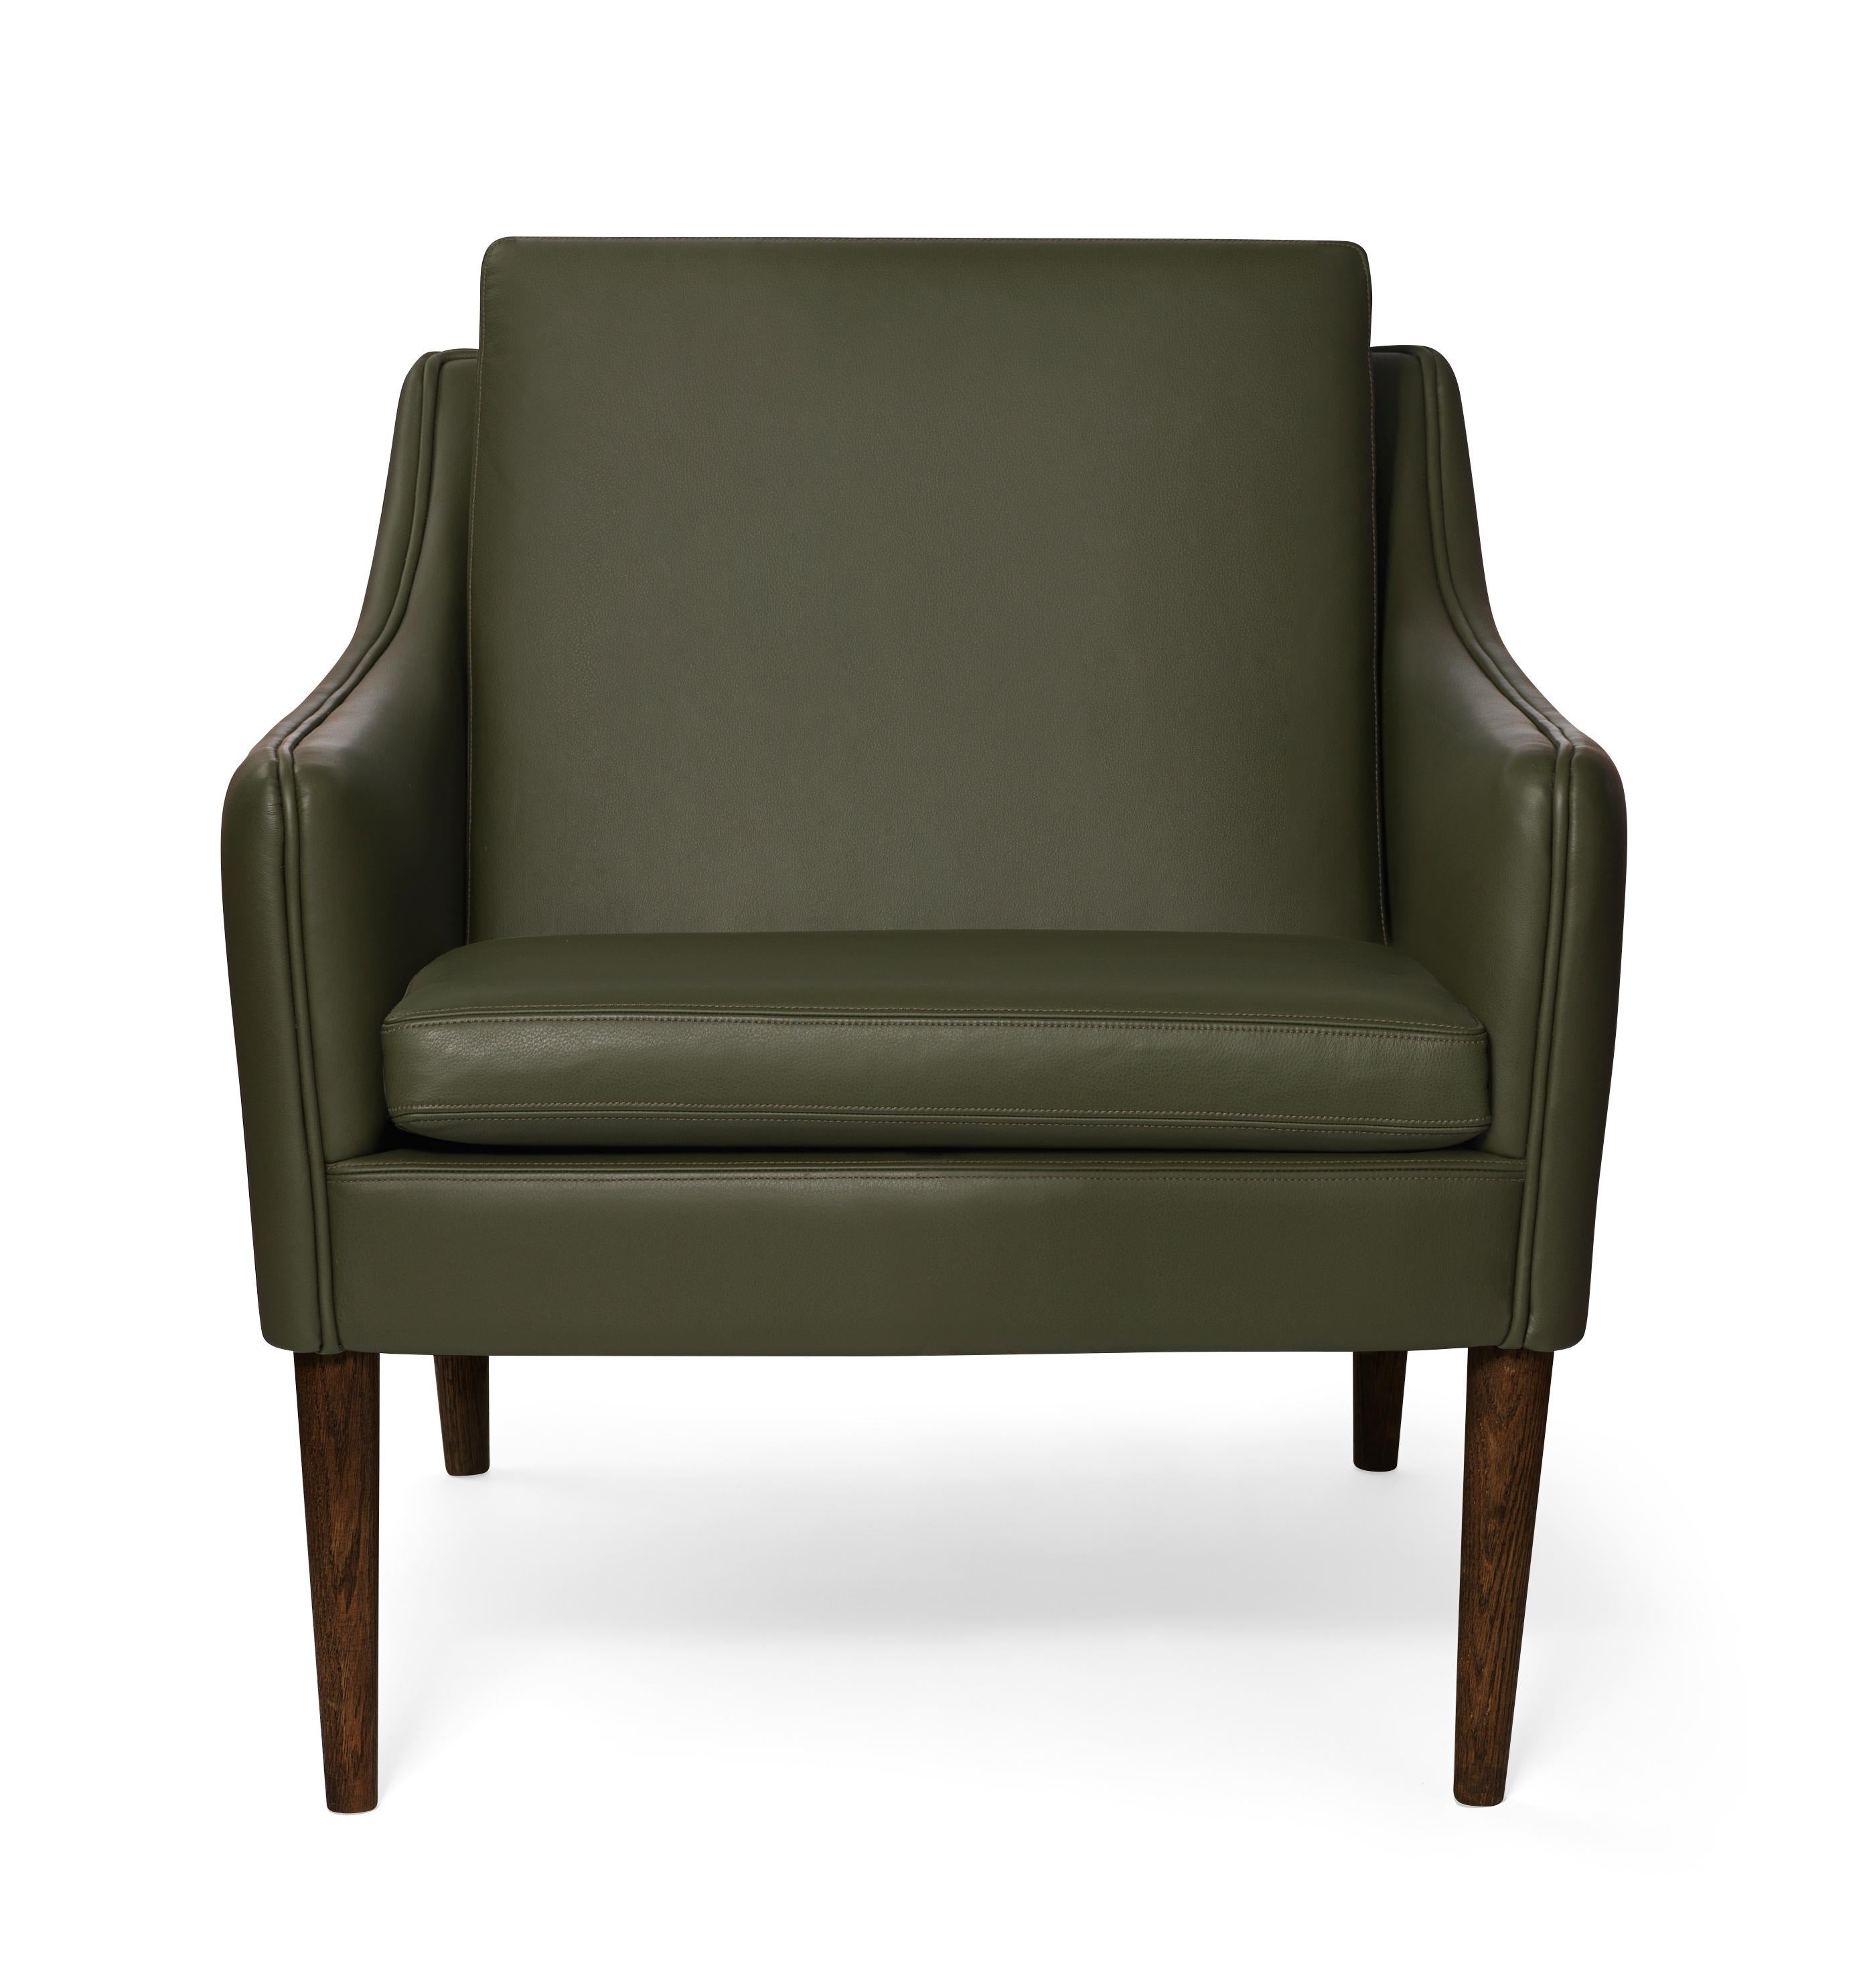 For Sale: Green (Challenger Pickle green) Mr. Olsen Lounge Chair with Walnut Legs, by Hans Olsen from Warm Nordic